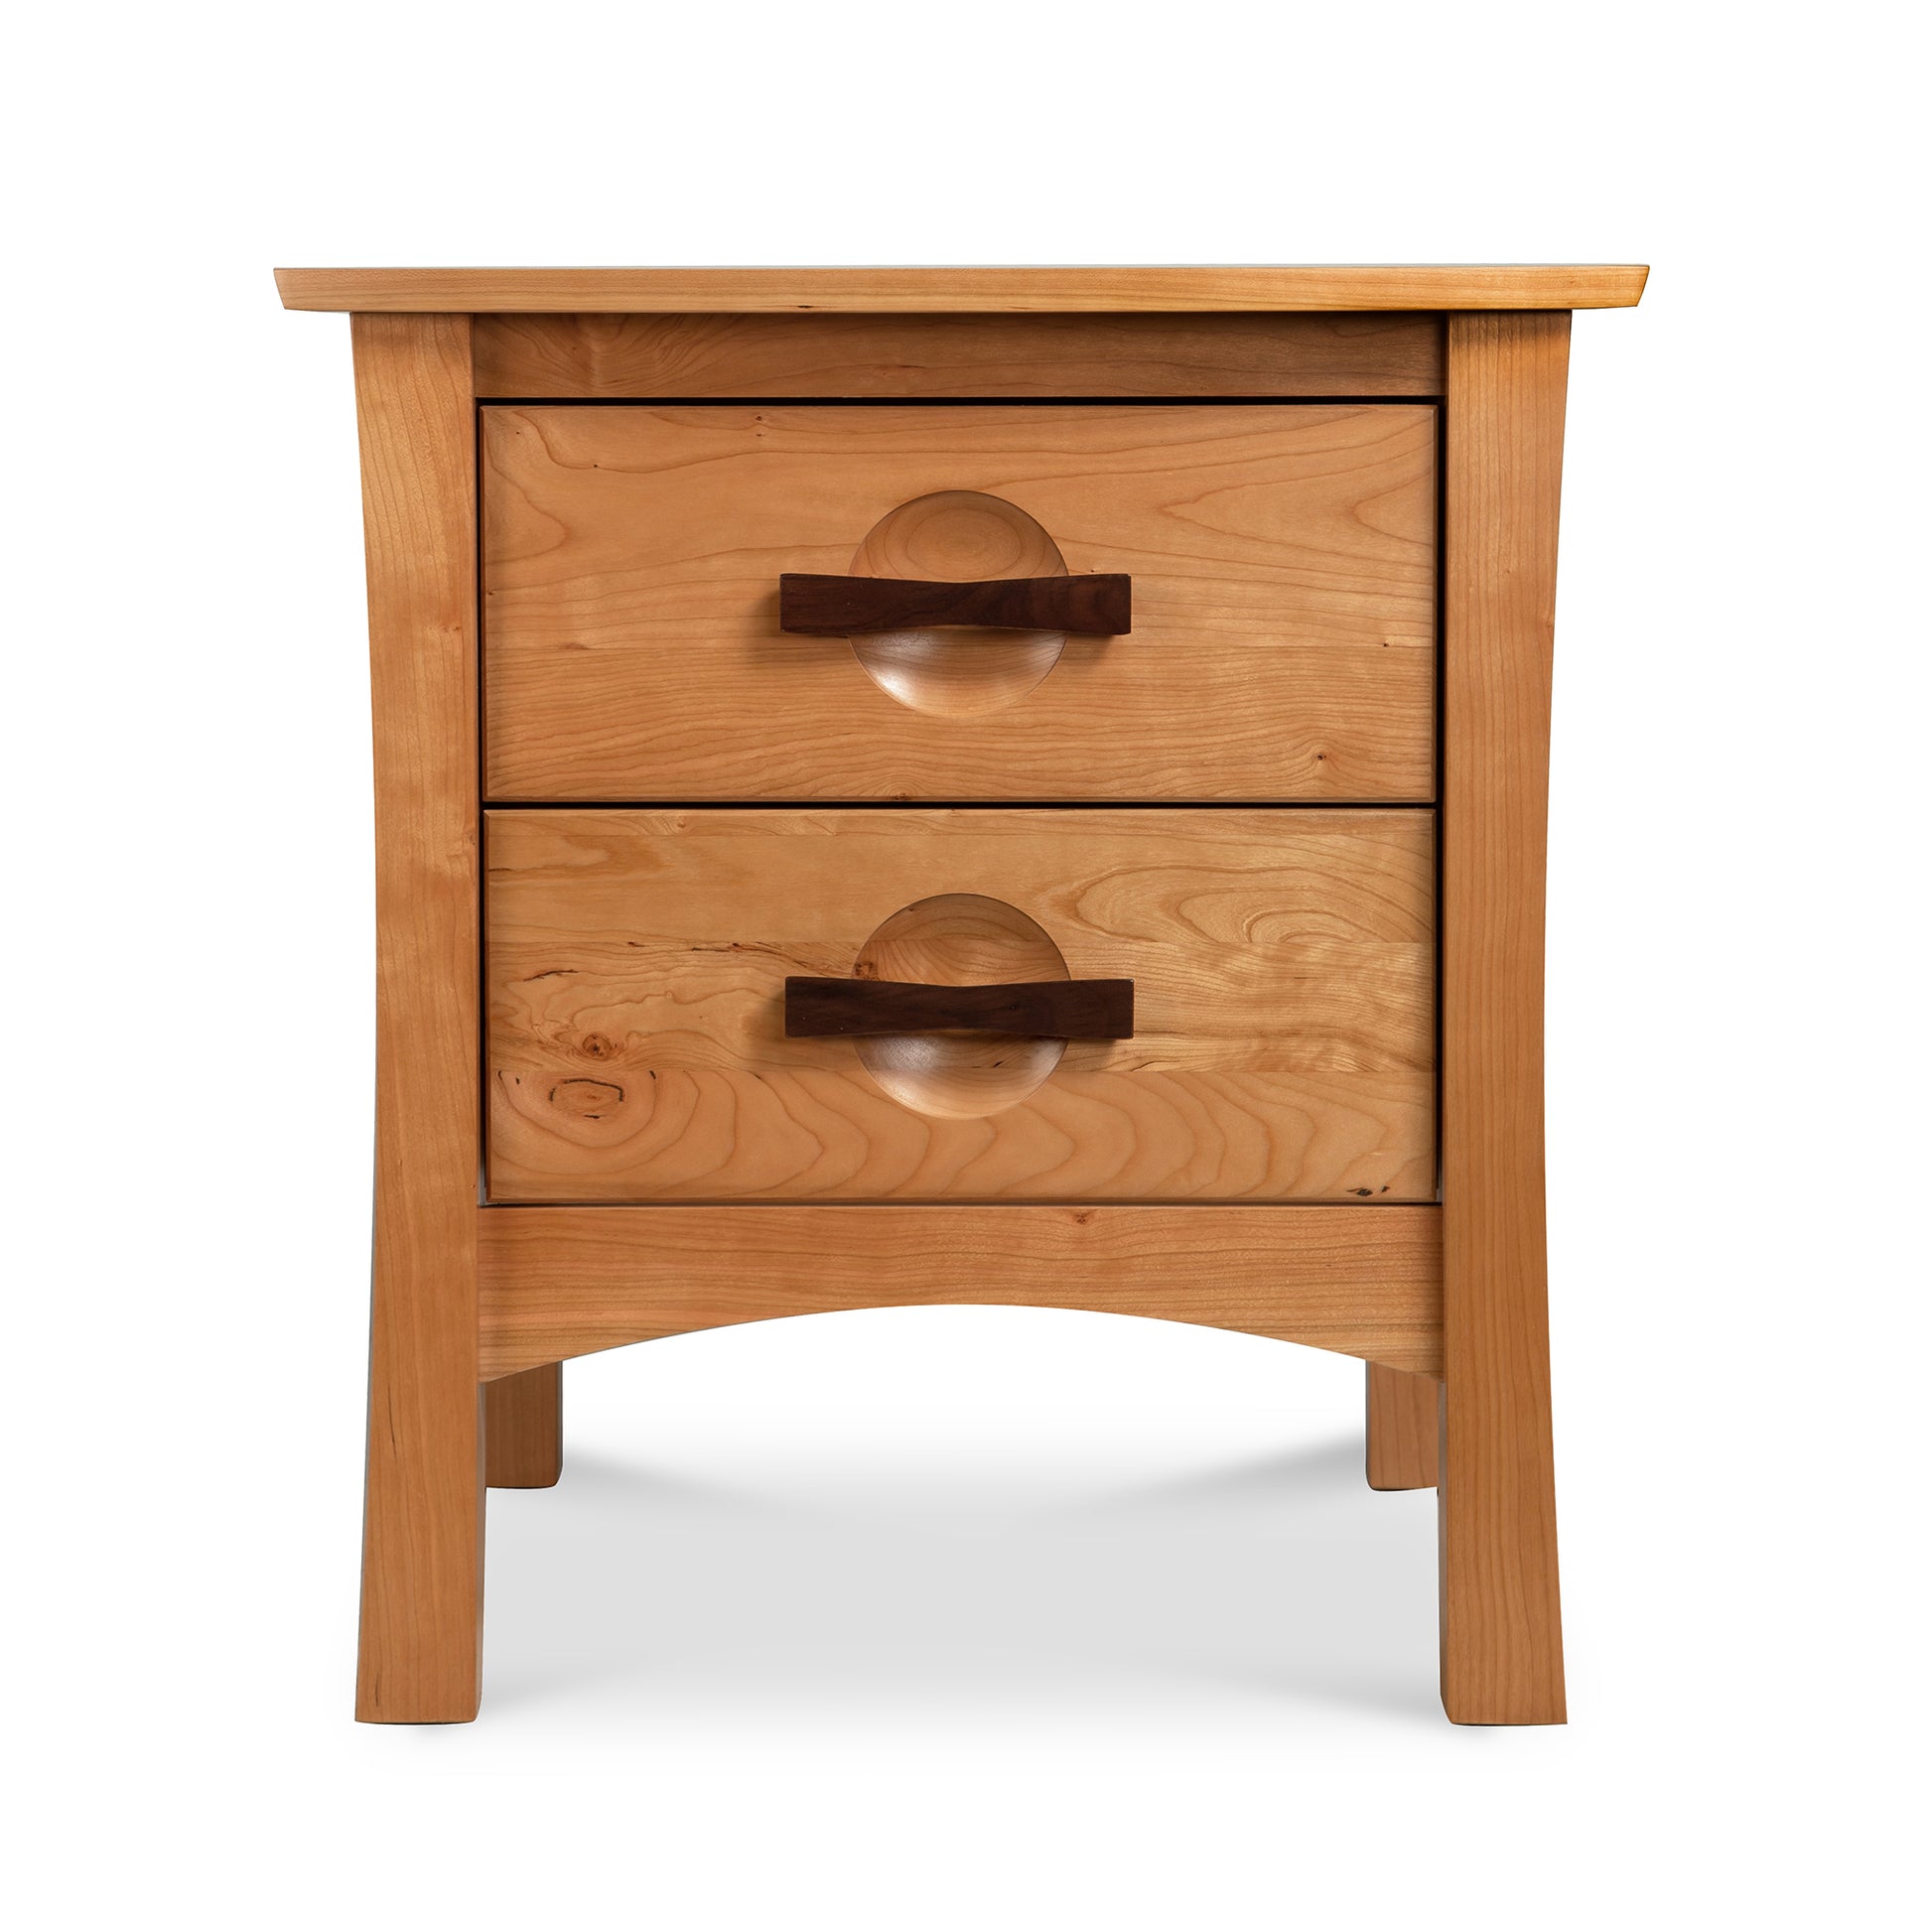 Copeland Furniture Berkeley 2-Drawer Nightstand with round handles, embodying American Arts & Crafts design, isolated on a white background.